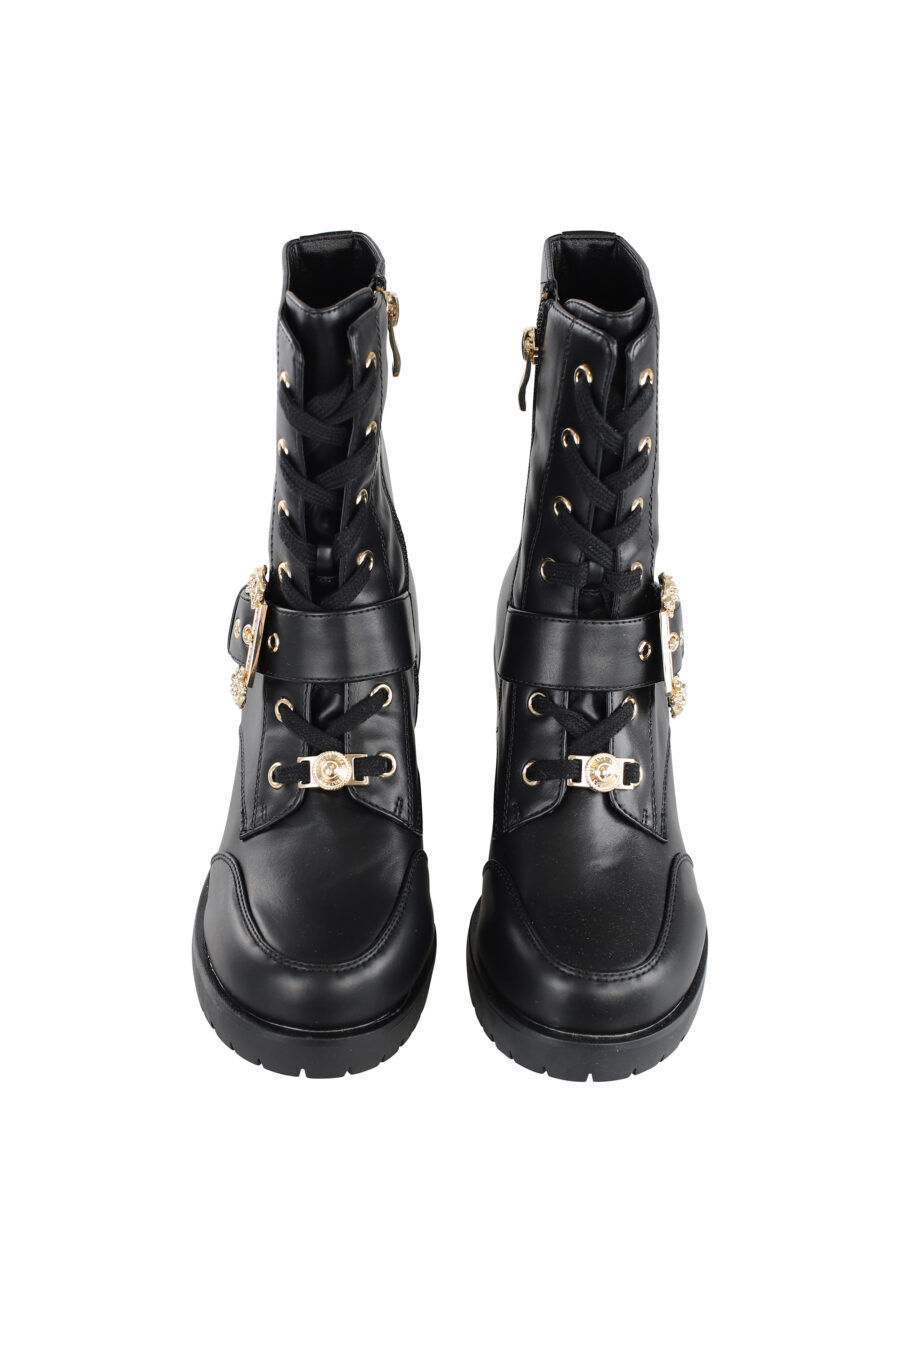 Black boots with baroque buckle and heel - IMG 7096